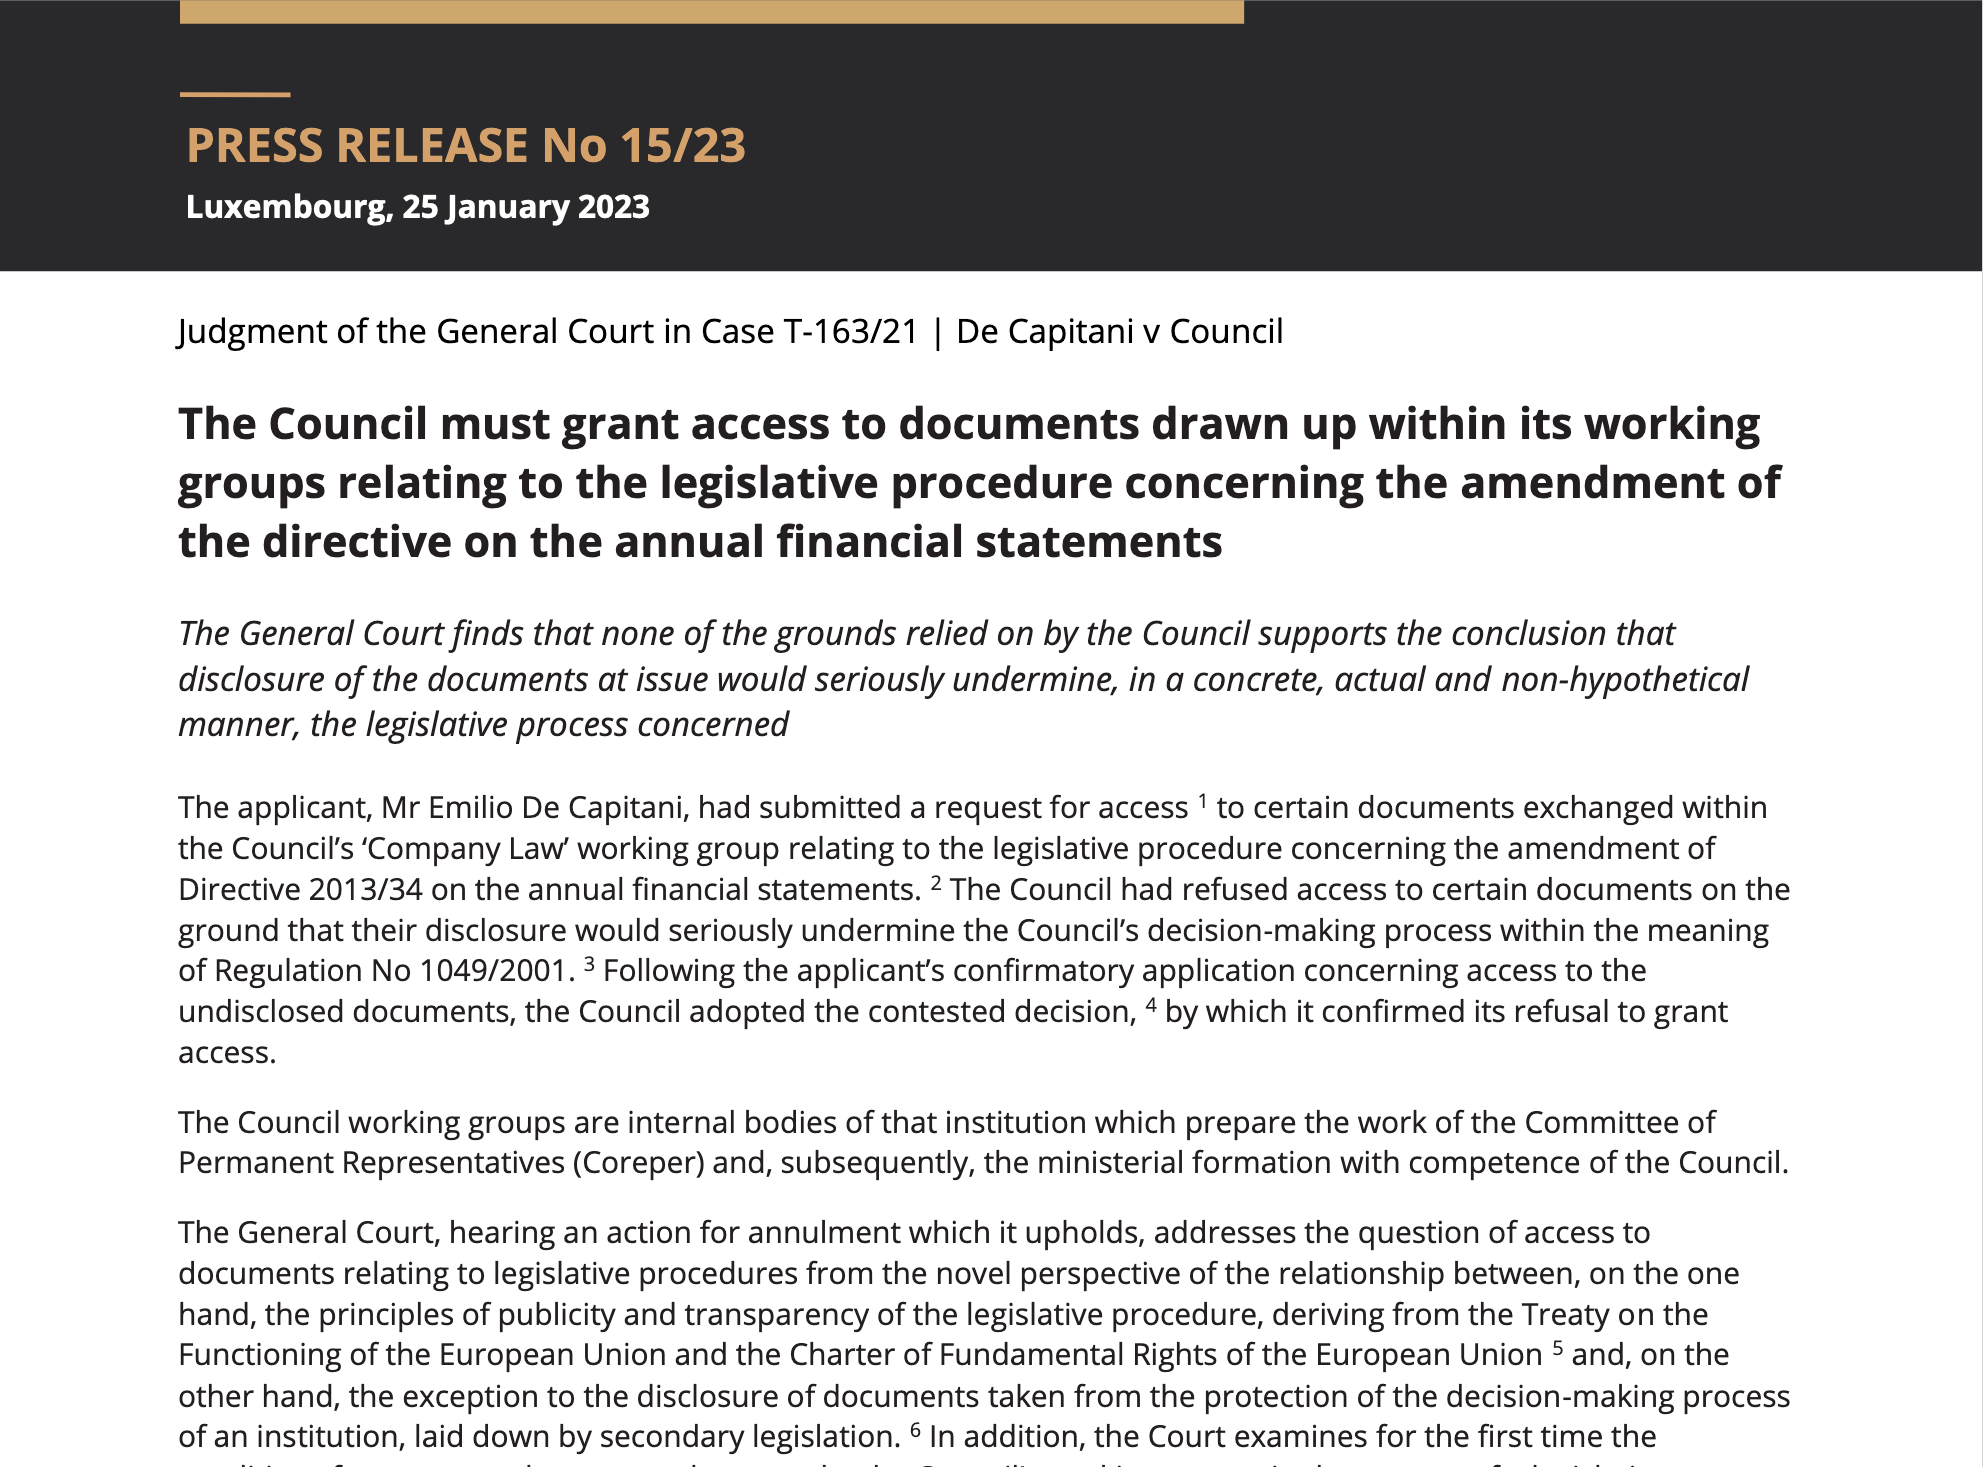 Press release of the European Court of Justice regarding its "Capitani" decision